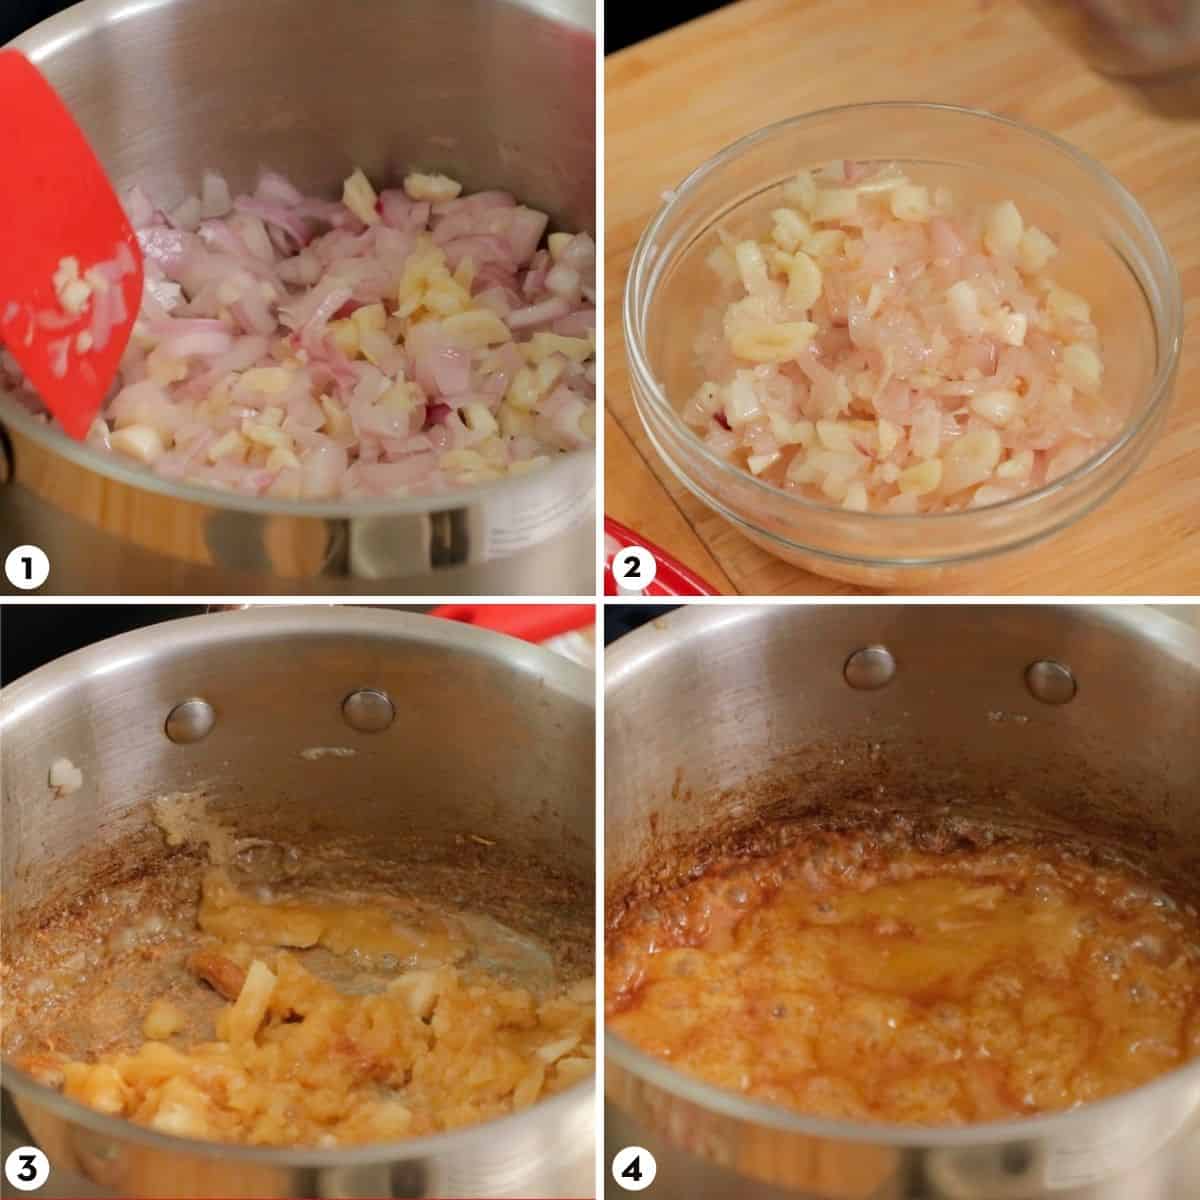 Process for making pad thai sauce steps 1-4